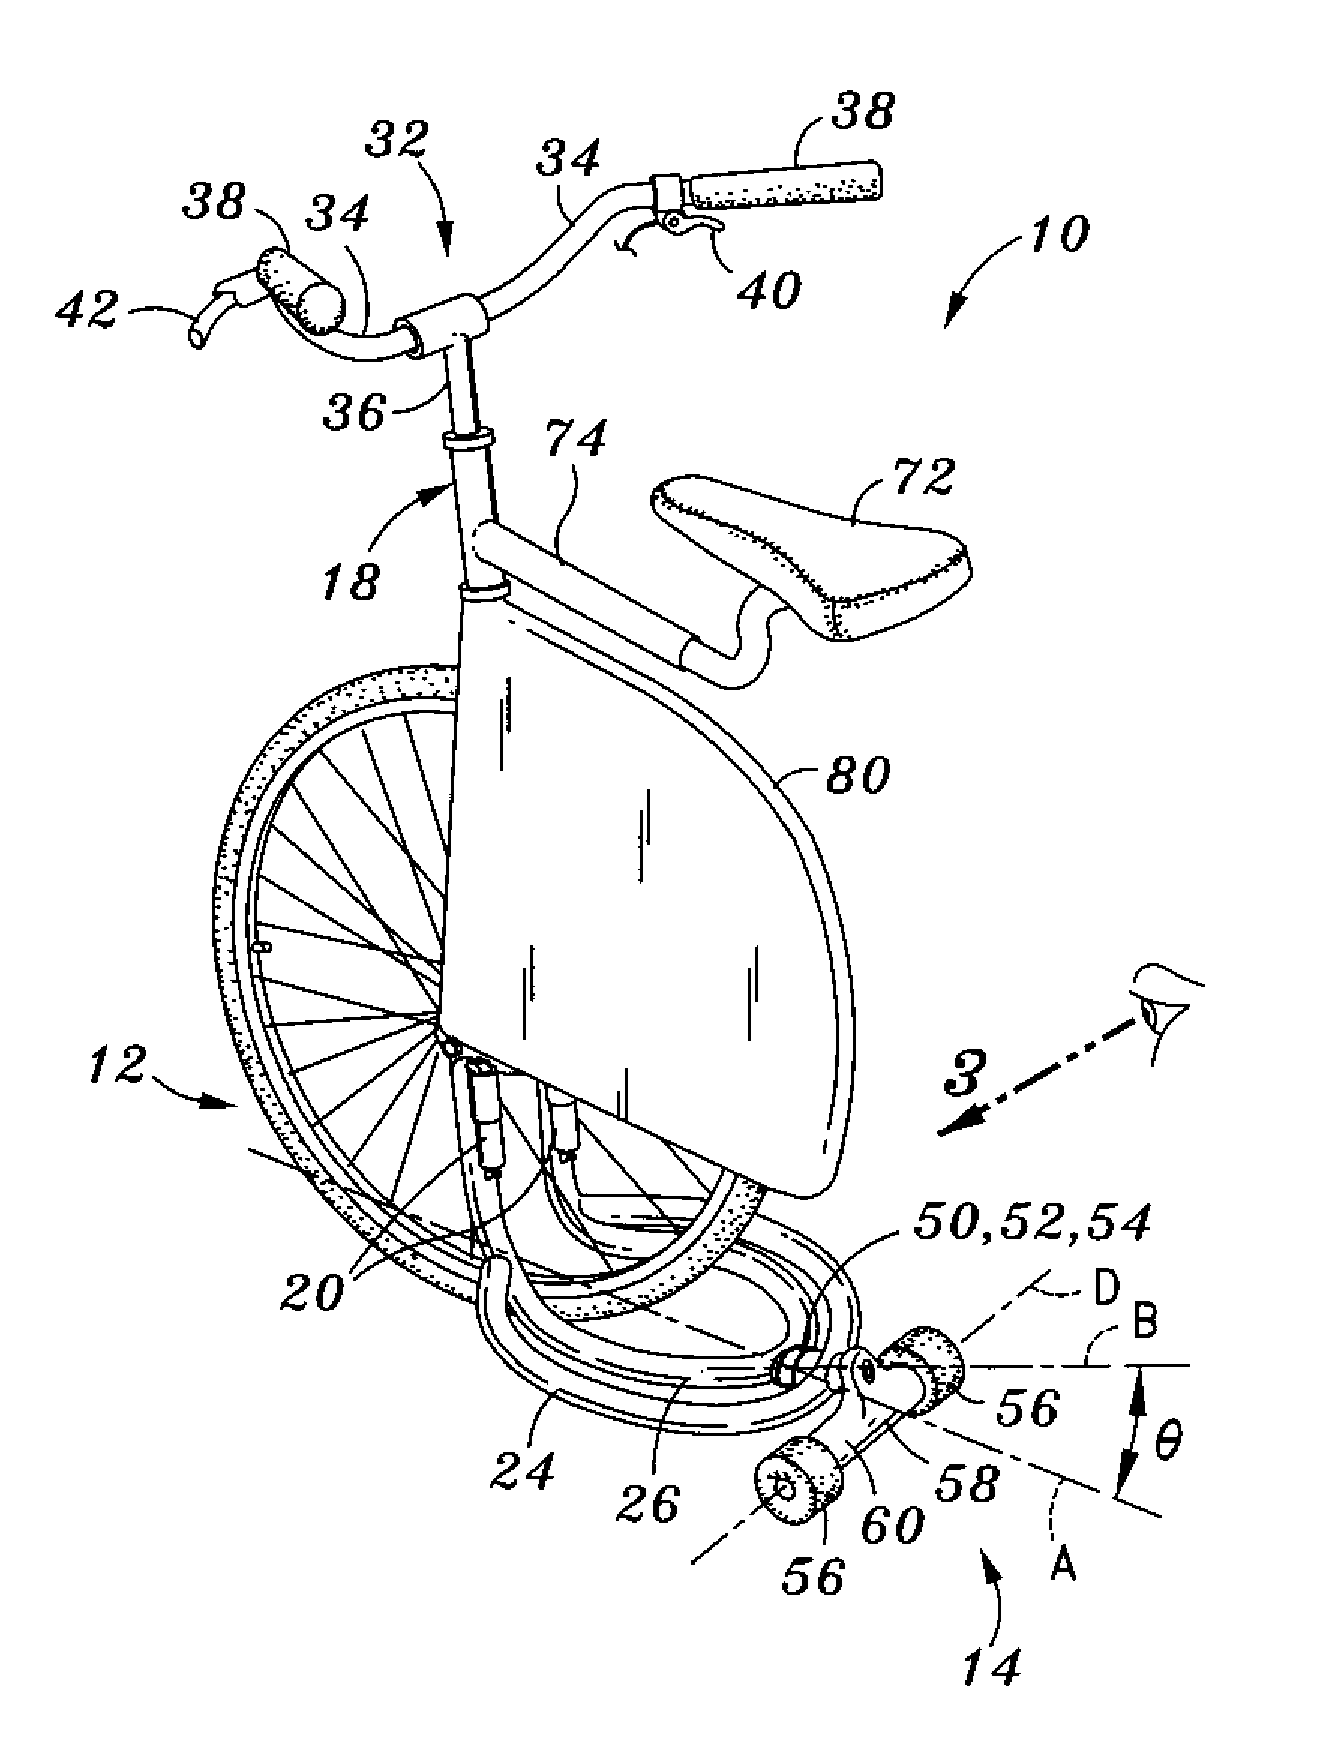 Three-wheeled rear-steering scooter